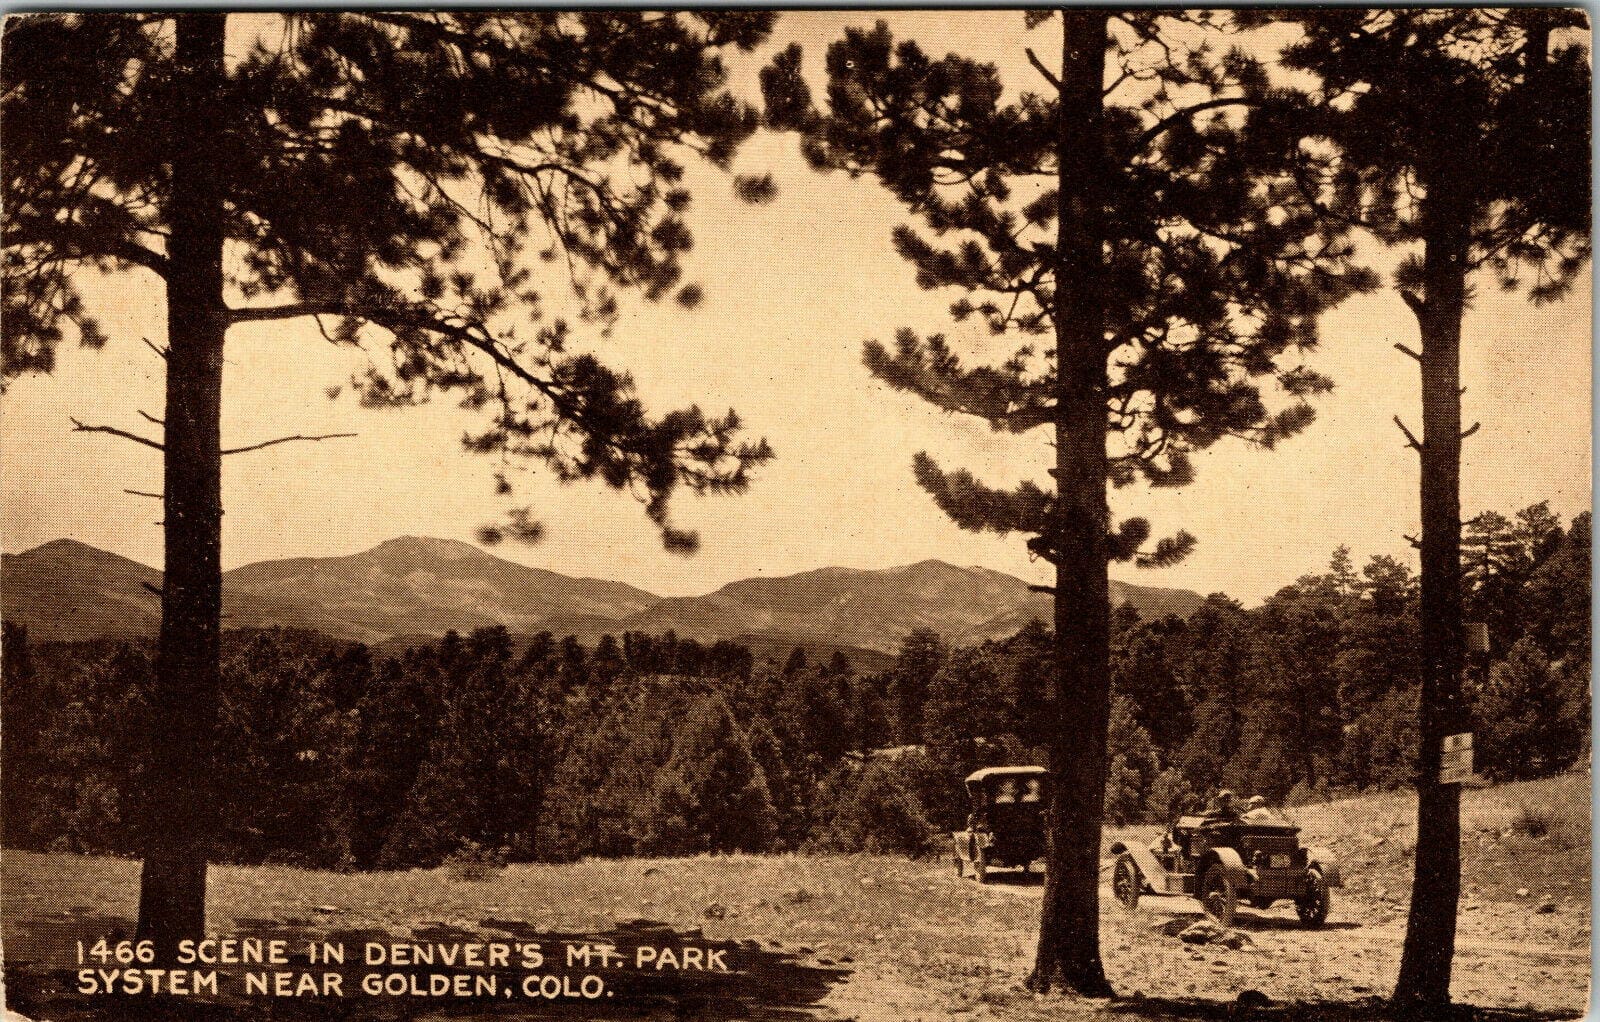 two 1920s-era cars on a narrow dirt road, heading into trees, with mountains in the background